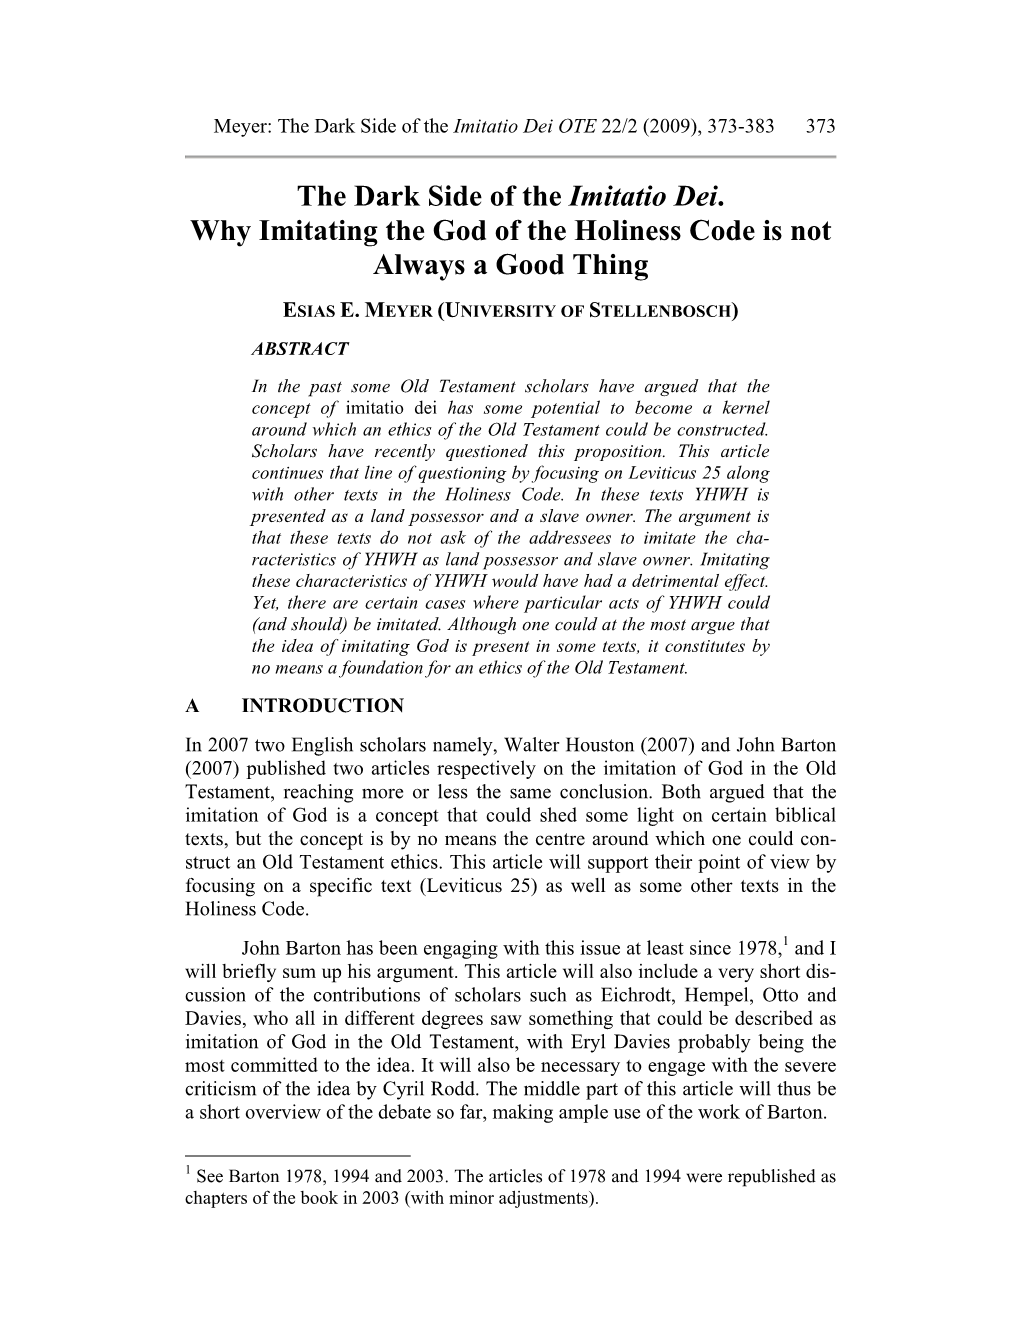 The Dark Side of the Imitatio Dei. Why Imitating the God of the Holiness Code Is Not Always a Good Thing